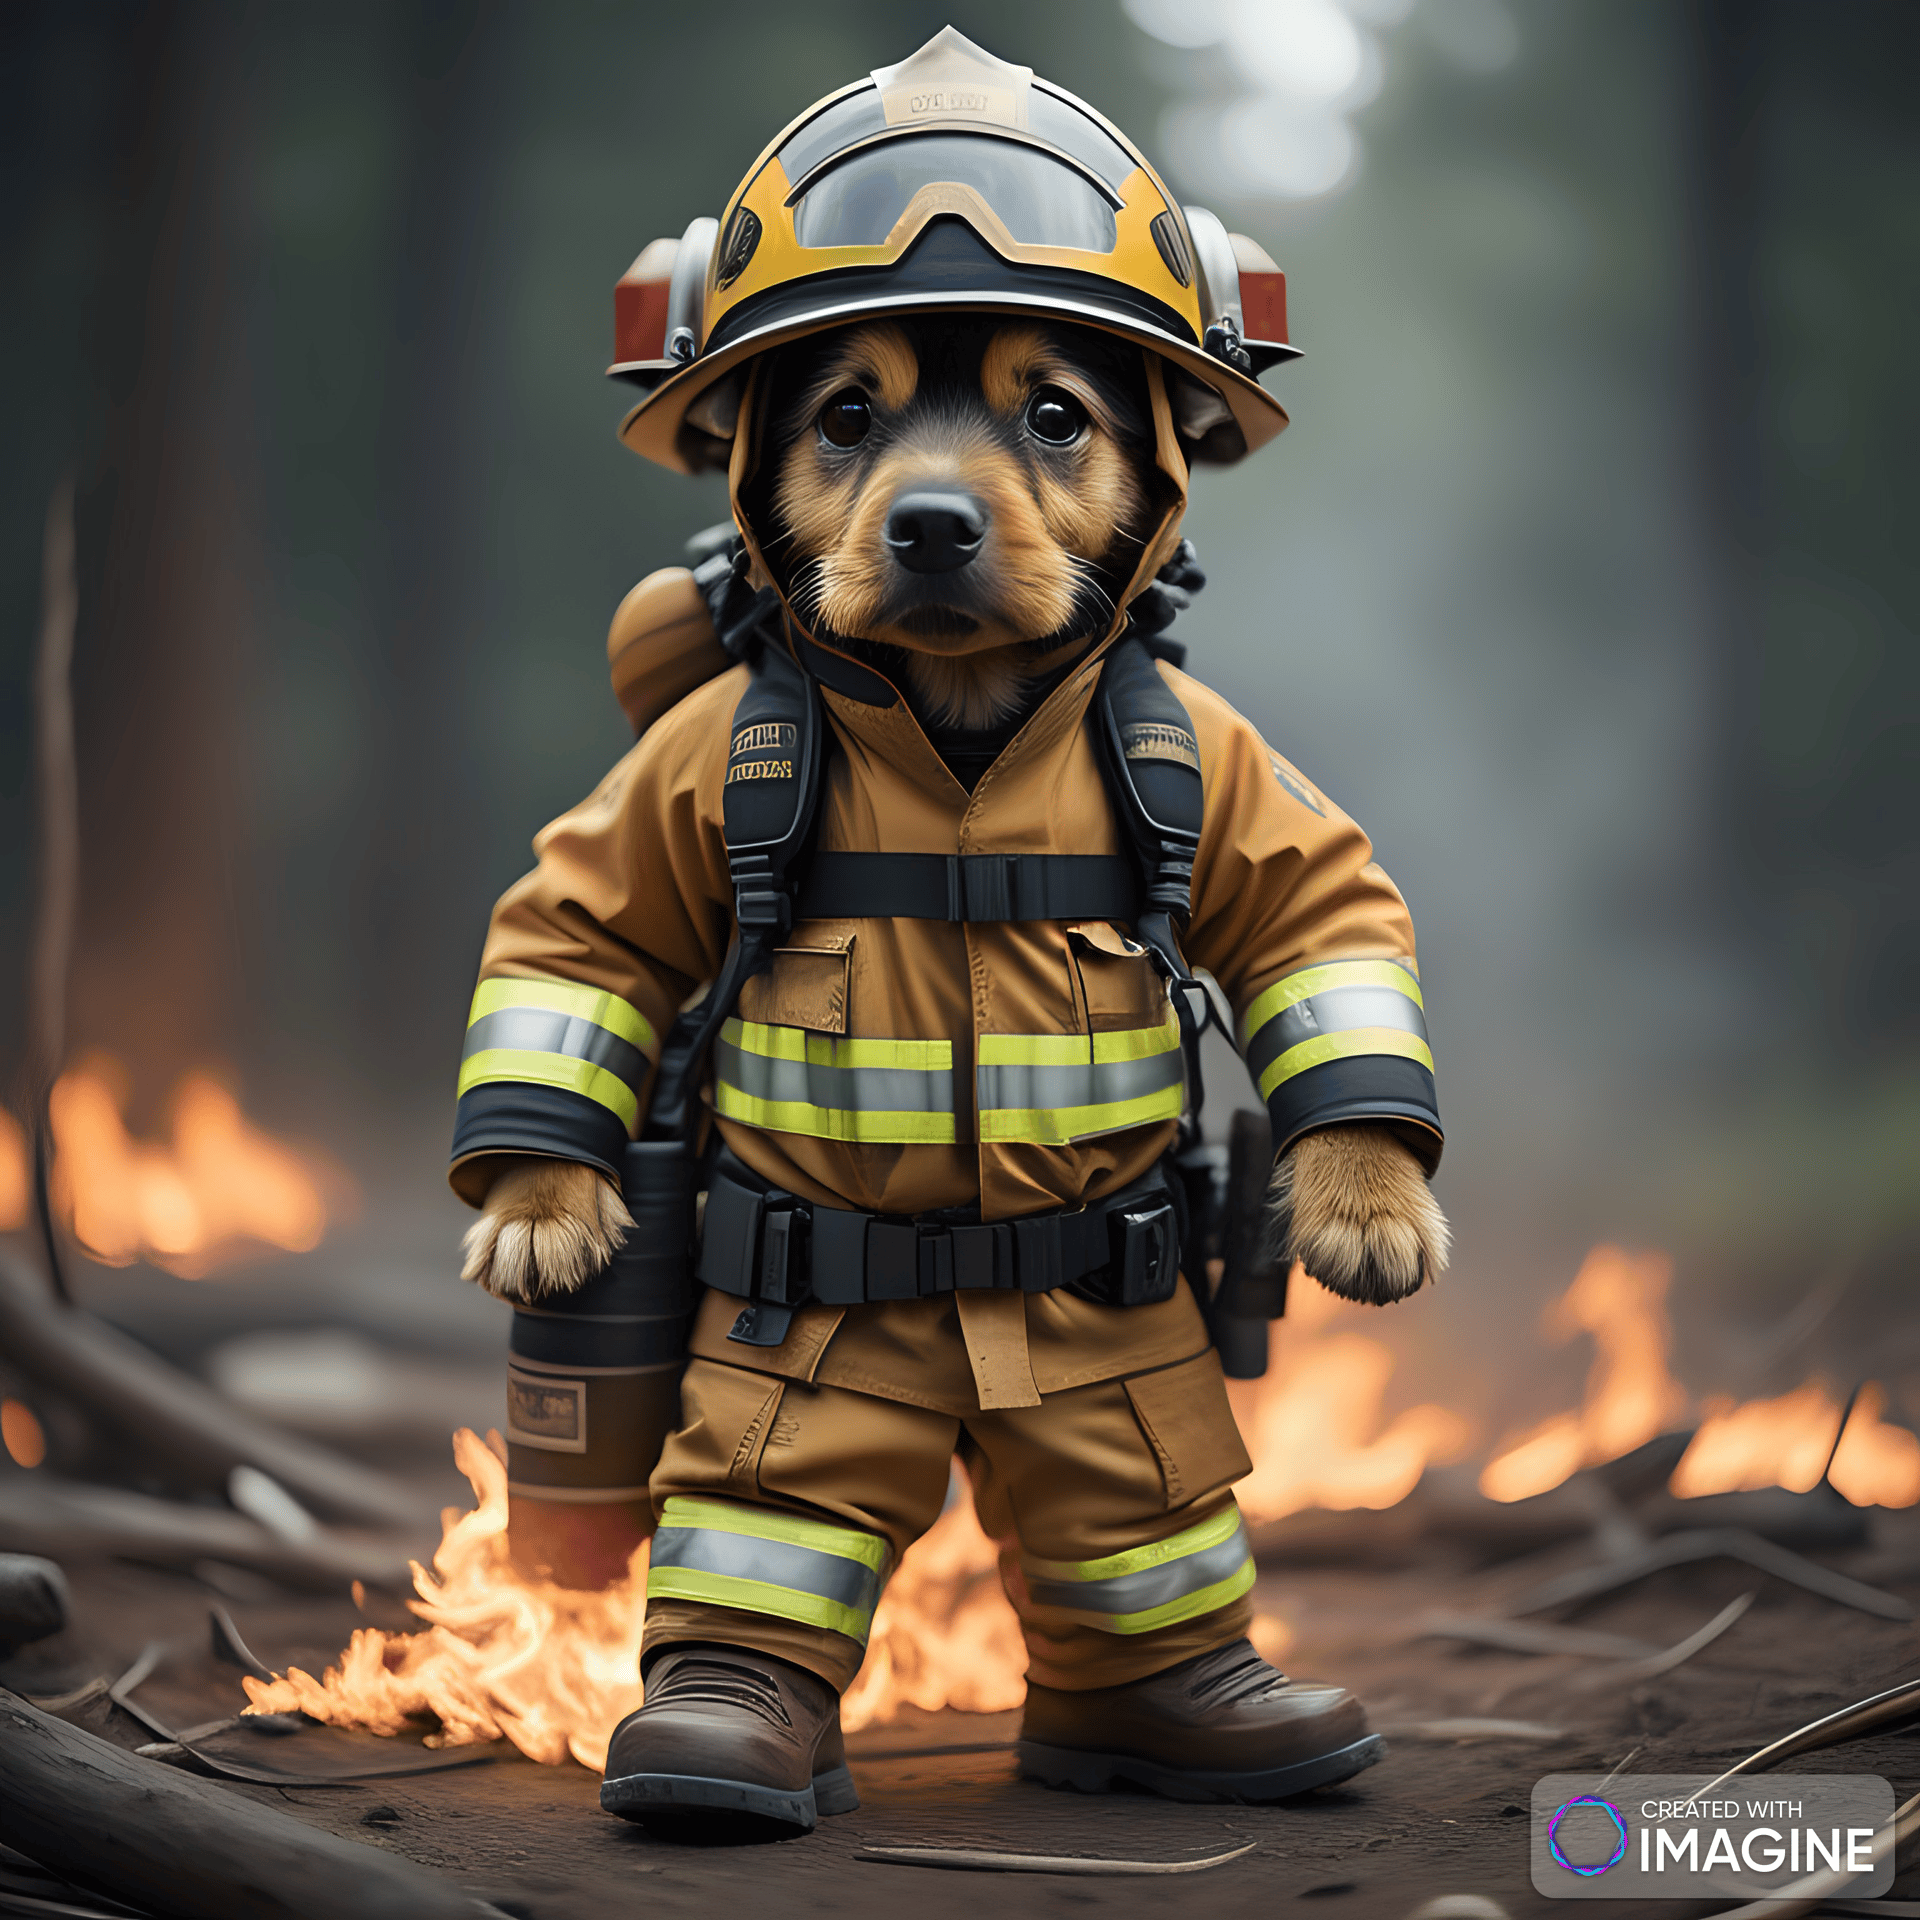 AI Artwork Generated by Imagine - Cute Firefighter Dog